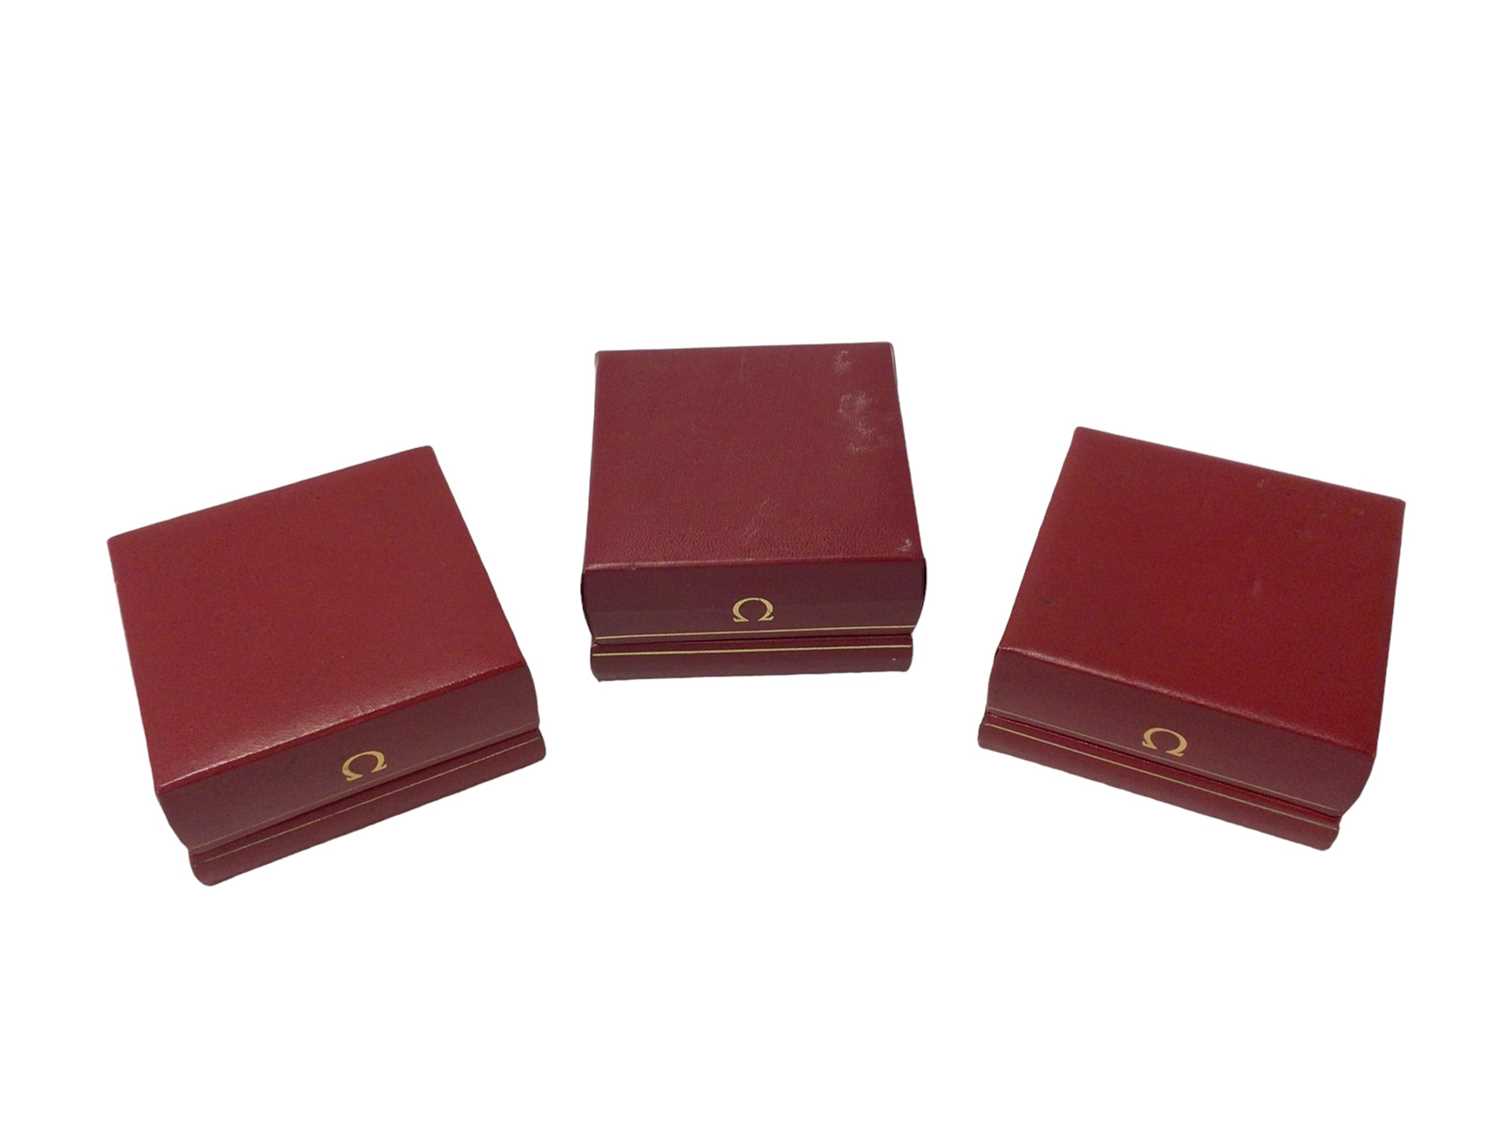 Three empty Omega watch boxes - Image 2 of 3